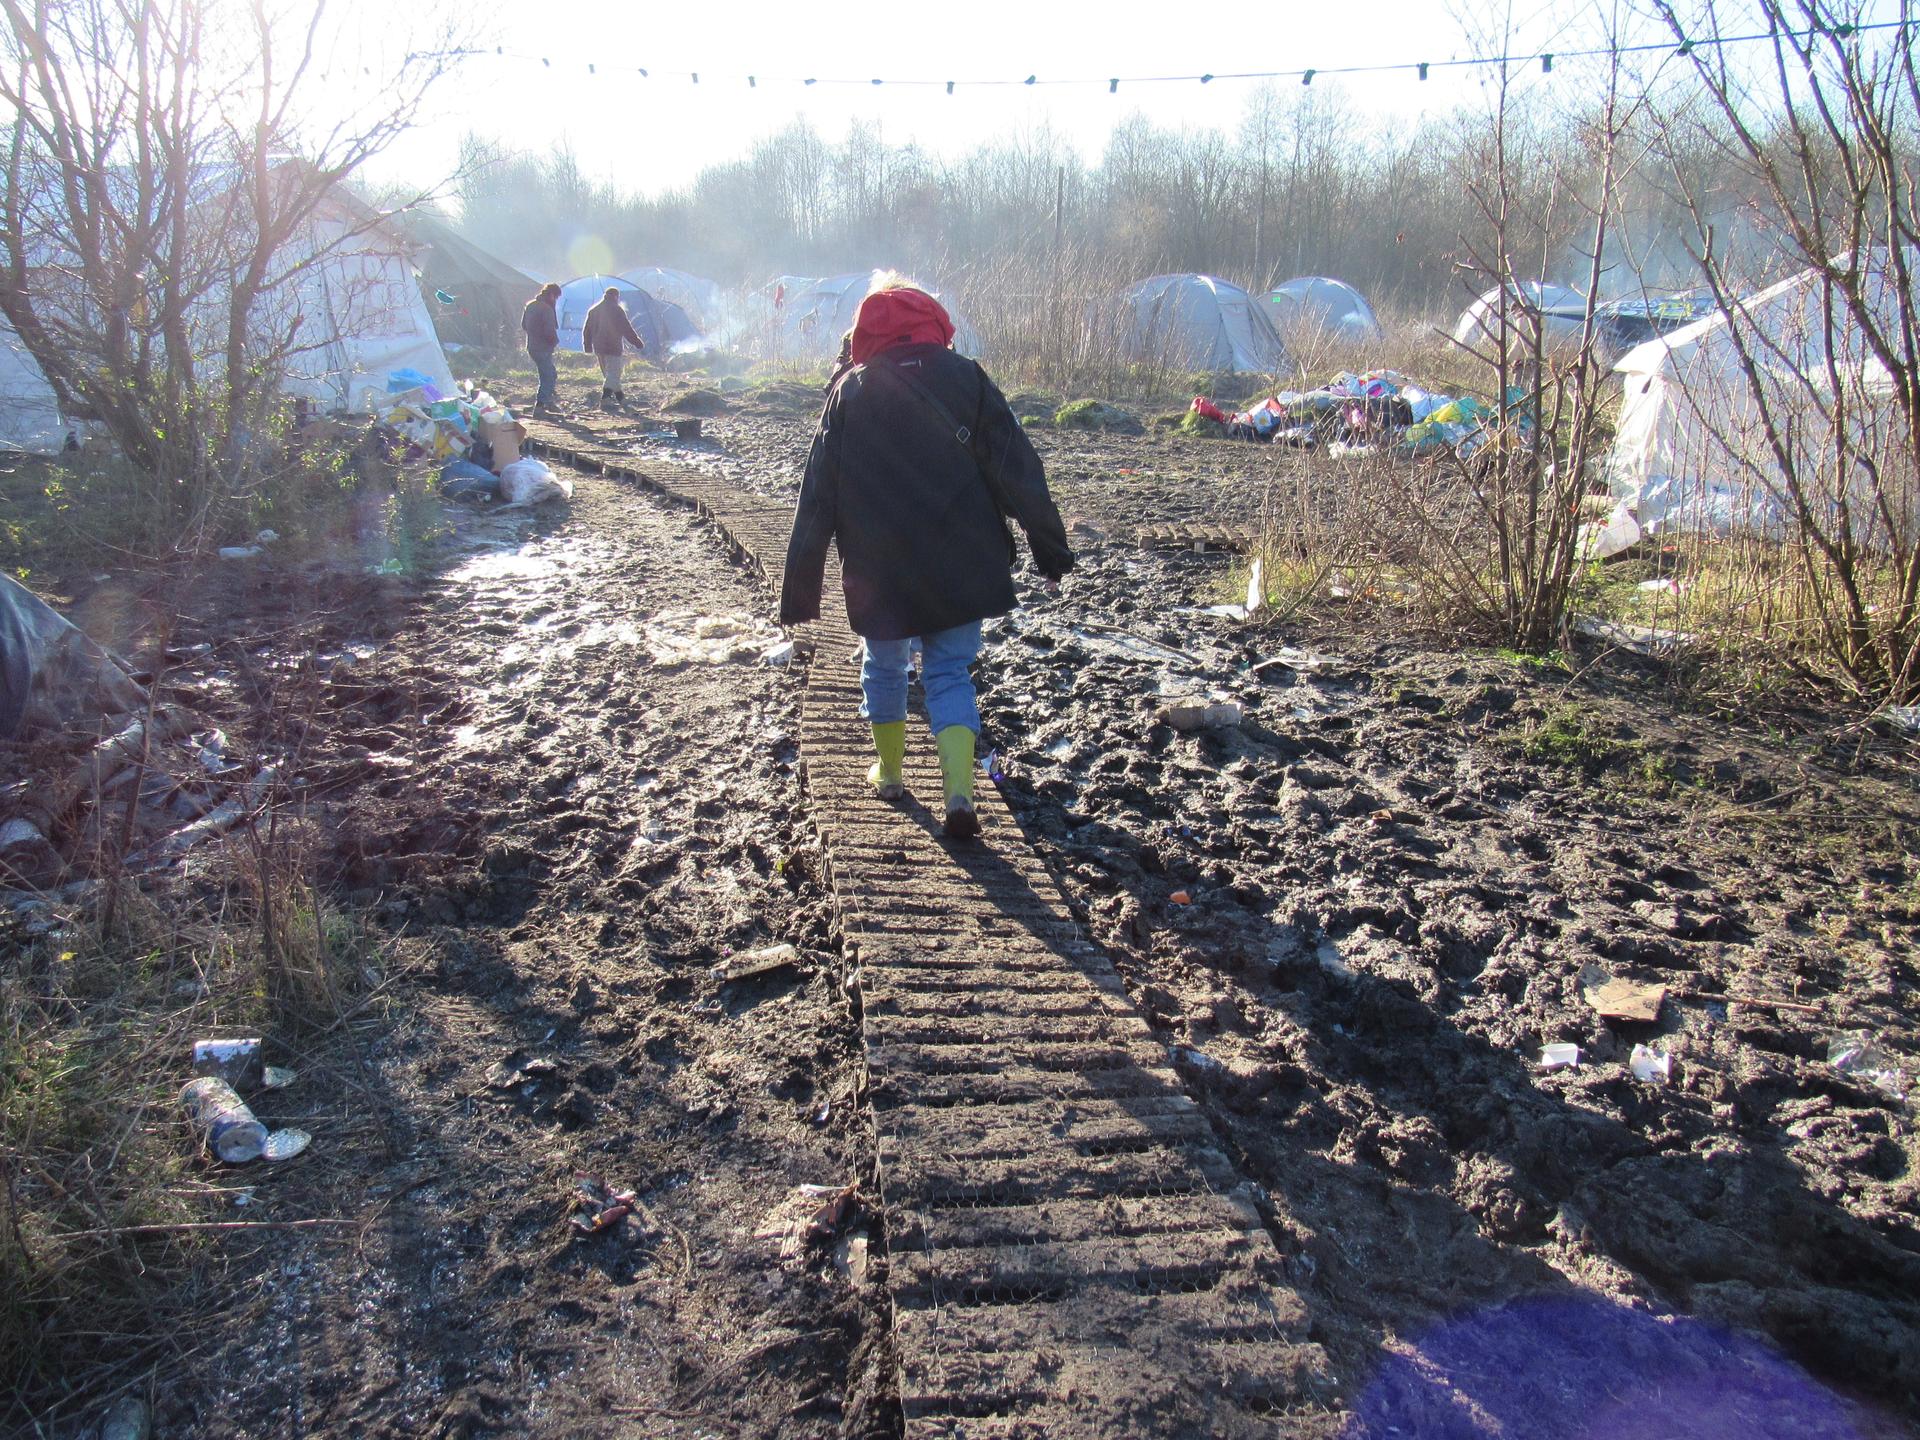 Mud in the camp